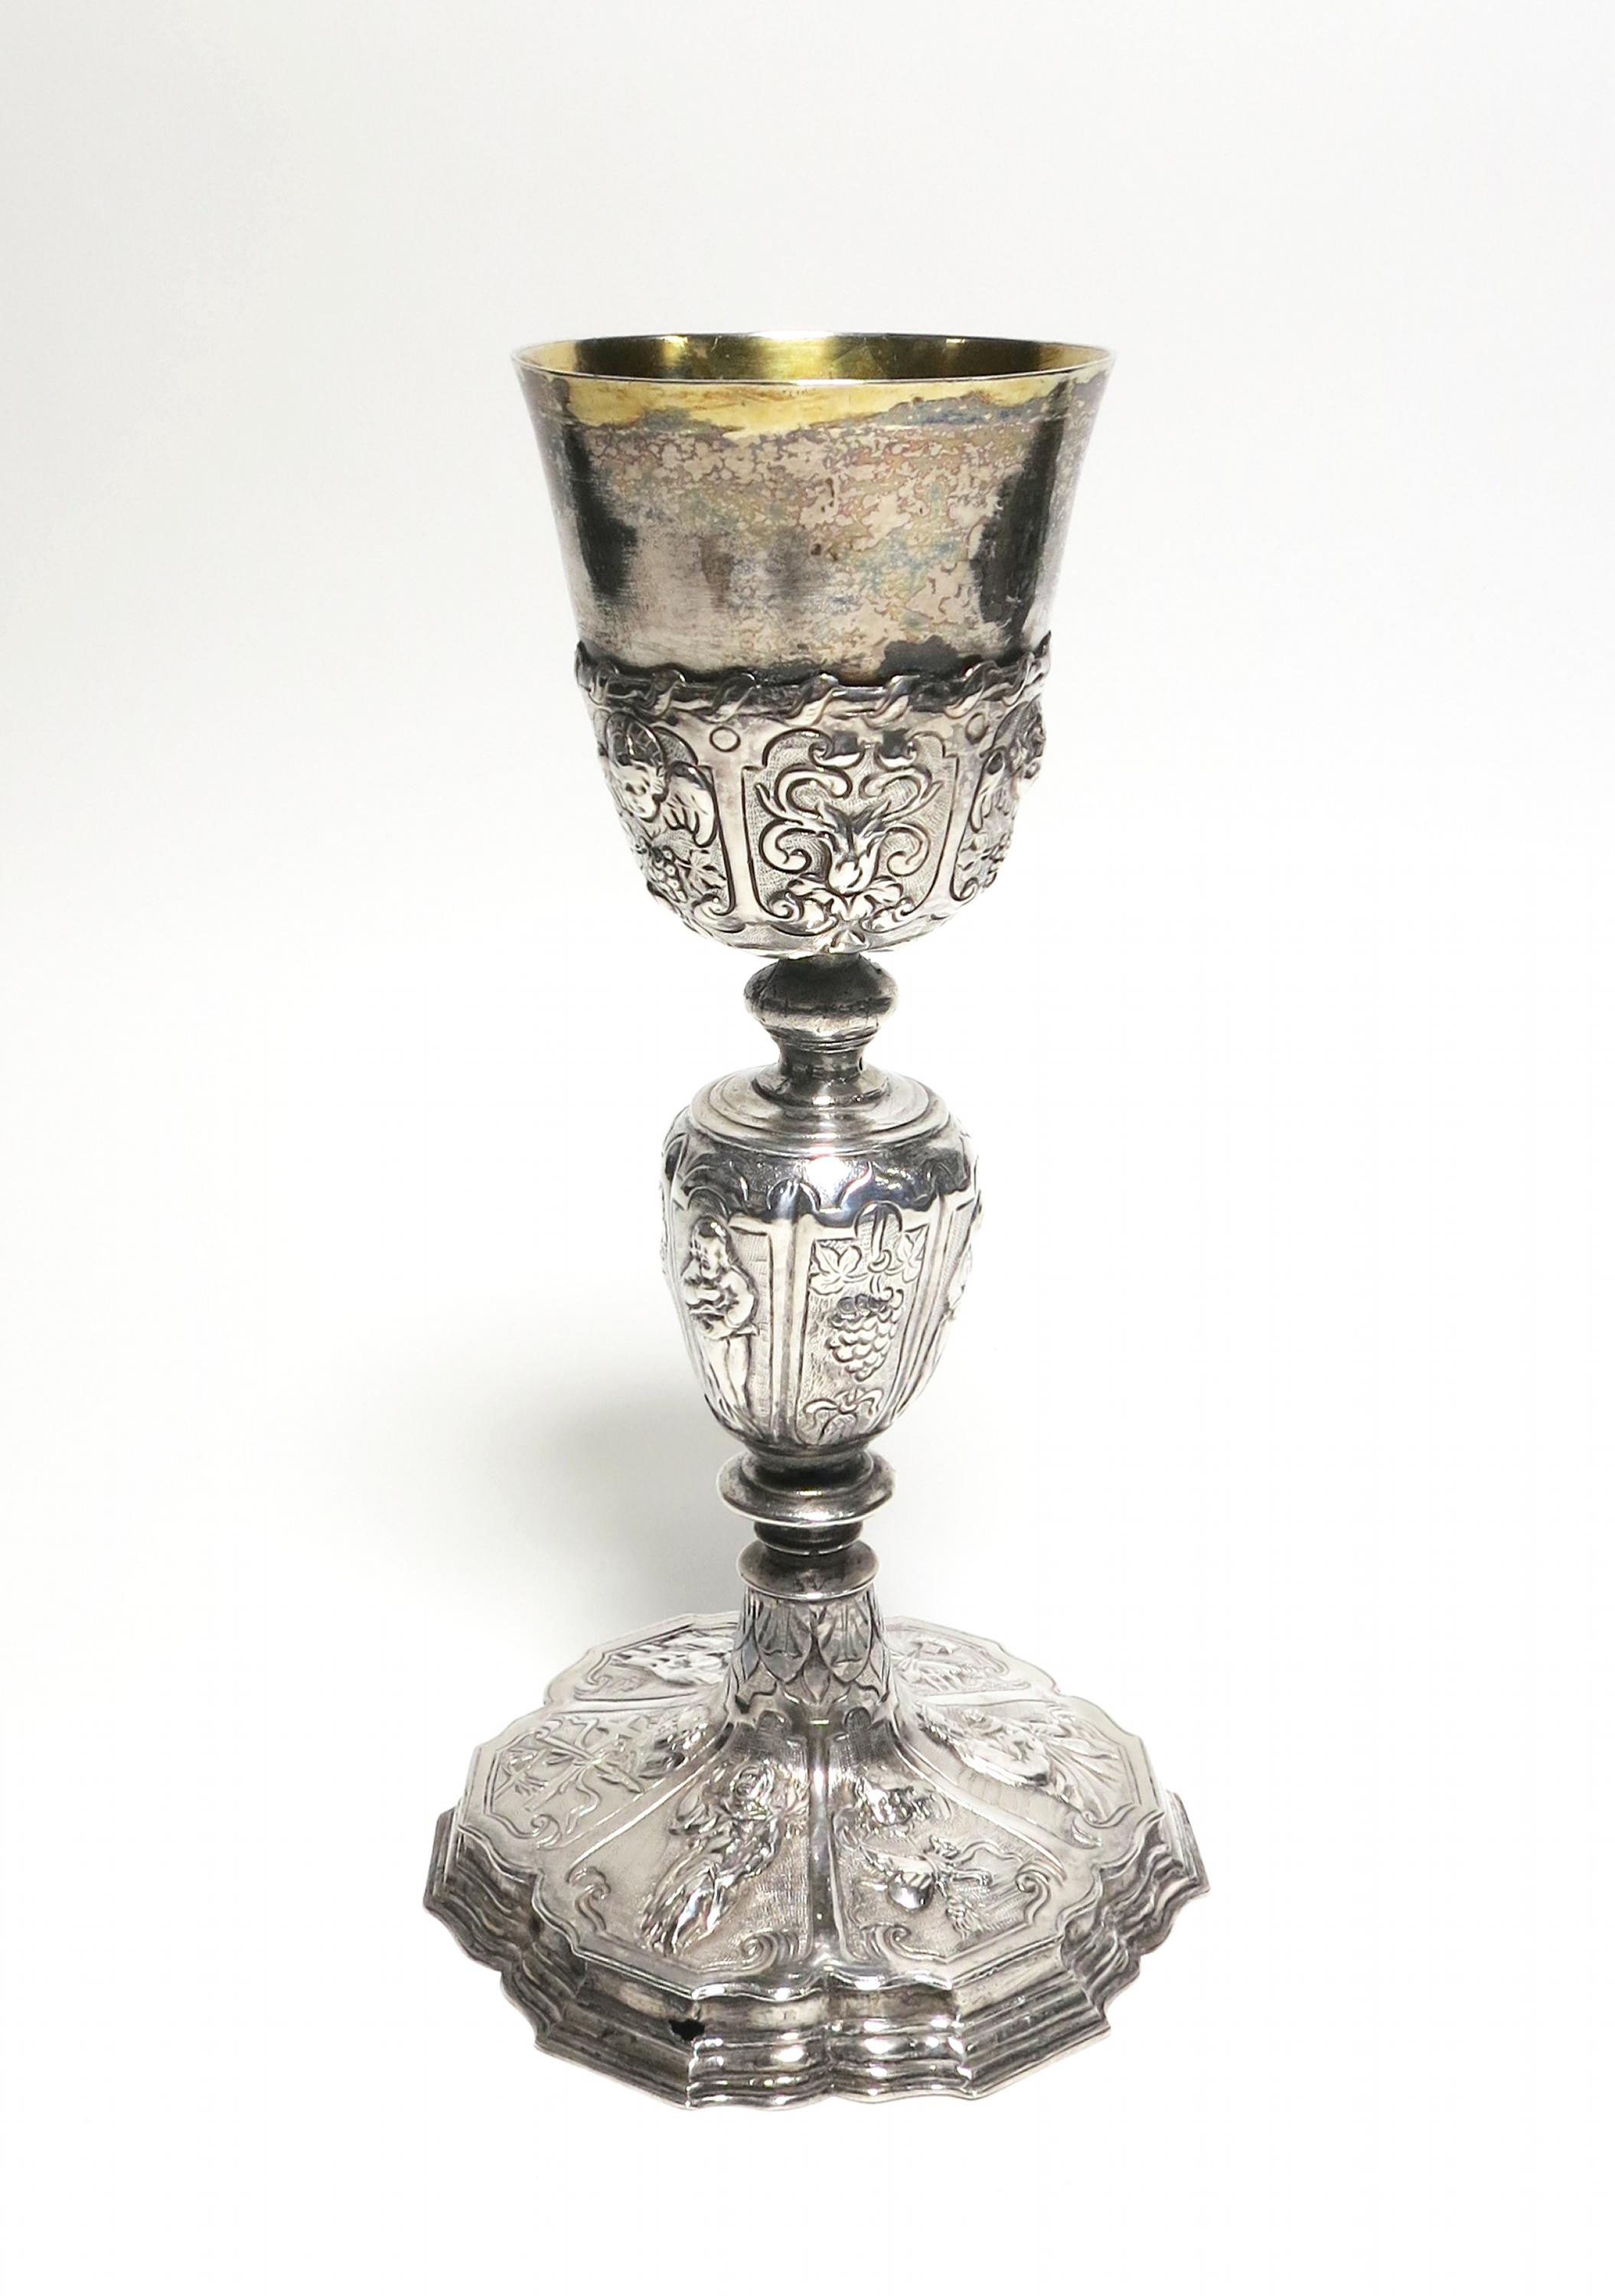 SILVER CHALICE WITH GILT BOWL. Presumably France. Date: 18th century. Technique: Silver, gilt cuppa. - Image 3 of 7